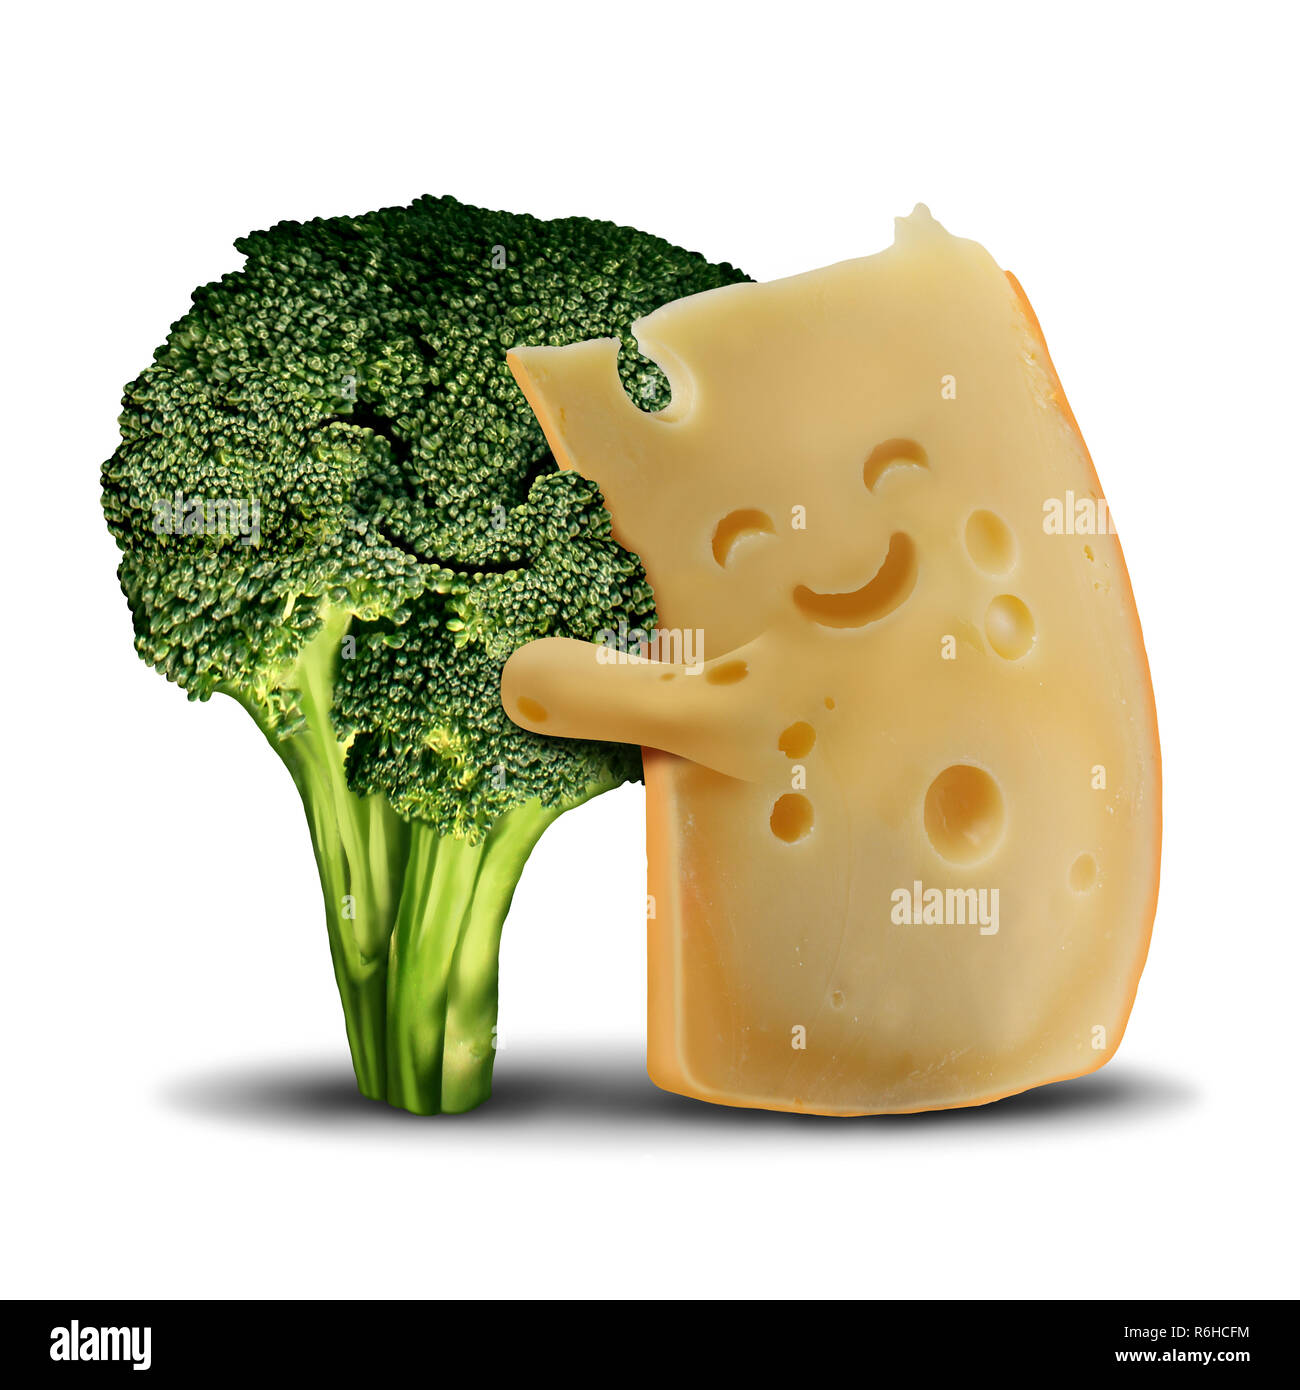 Funny broccoli and fun cheese food concept as cute smiling happy snack ingredients and with a healthy green vegetable character. Stock Photo